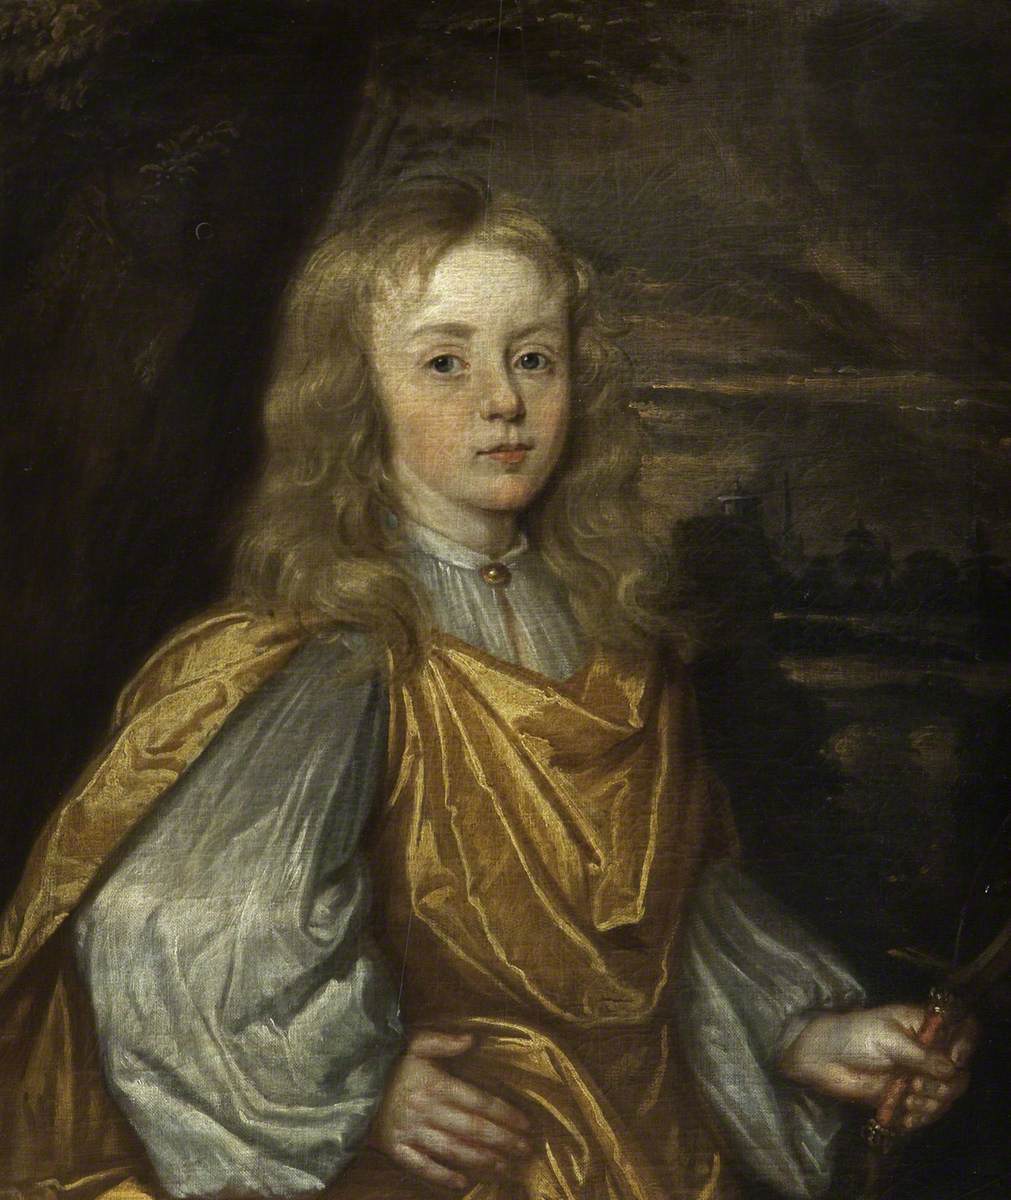 Davenport Lucy (c.1659/1660–1690), as a Young Boy